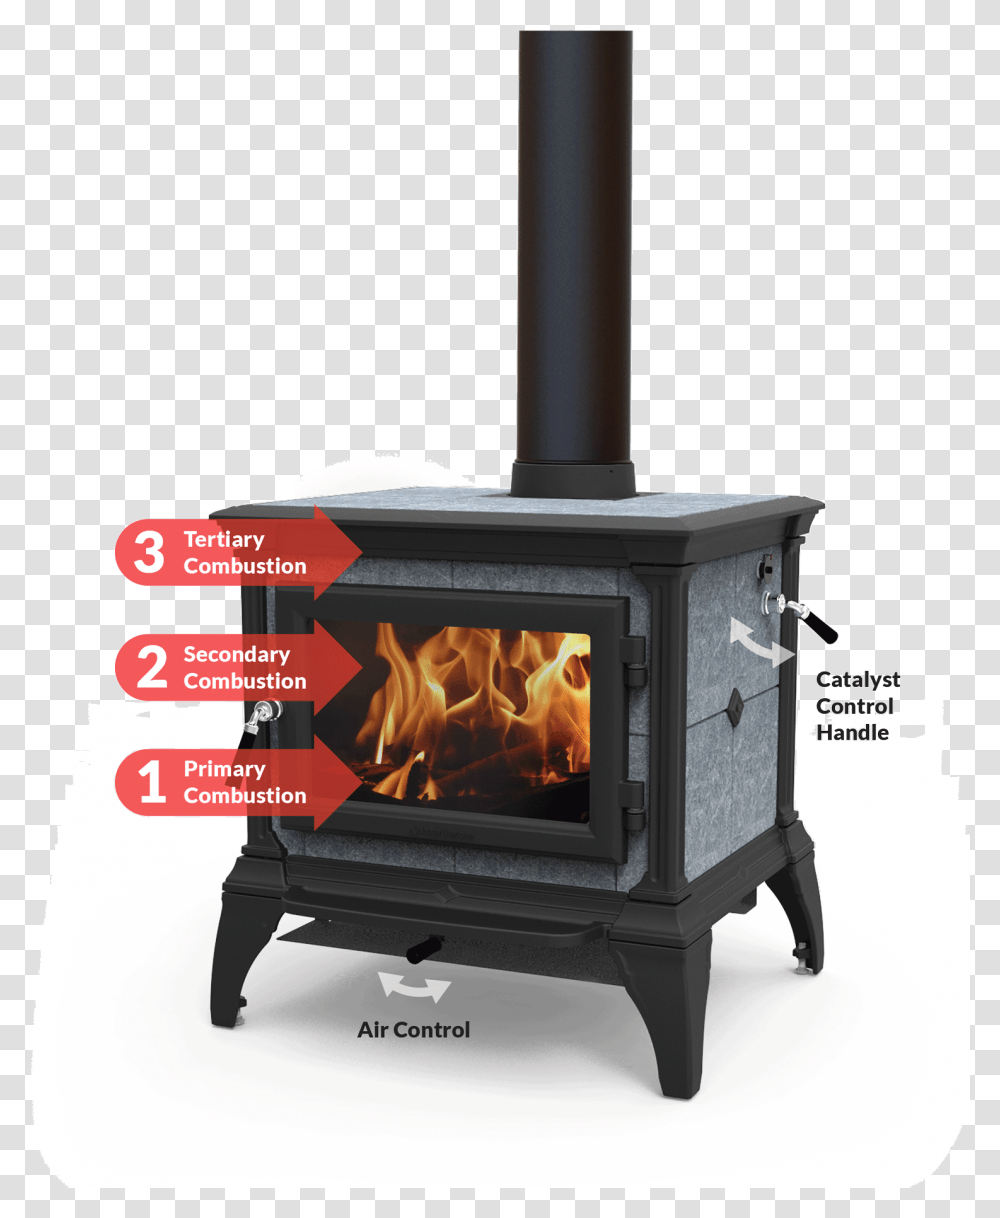 Wood Burning Stove, Oven, Appliance, Hearth, Gas Stove Transparent Png